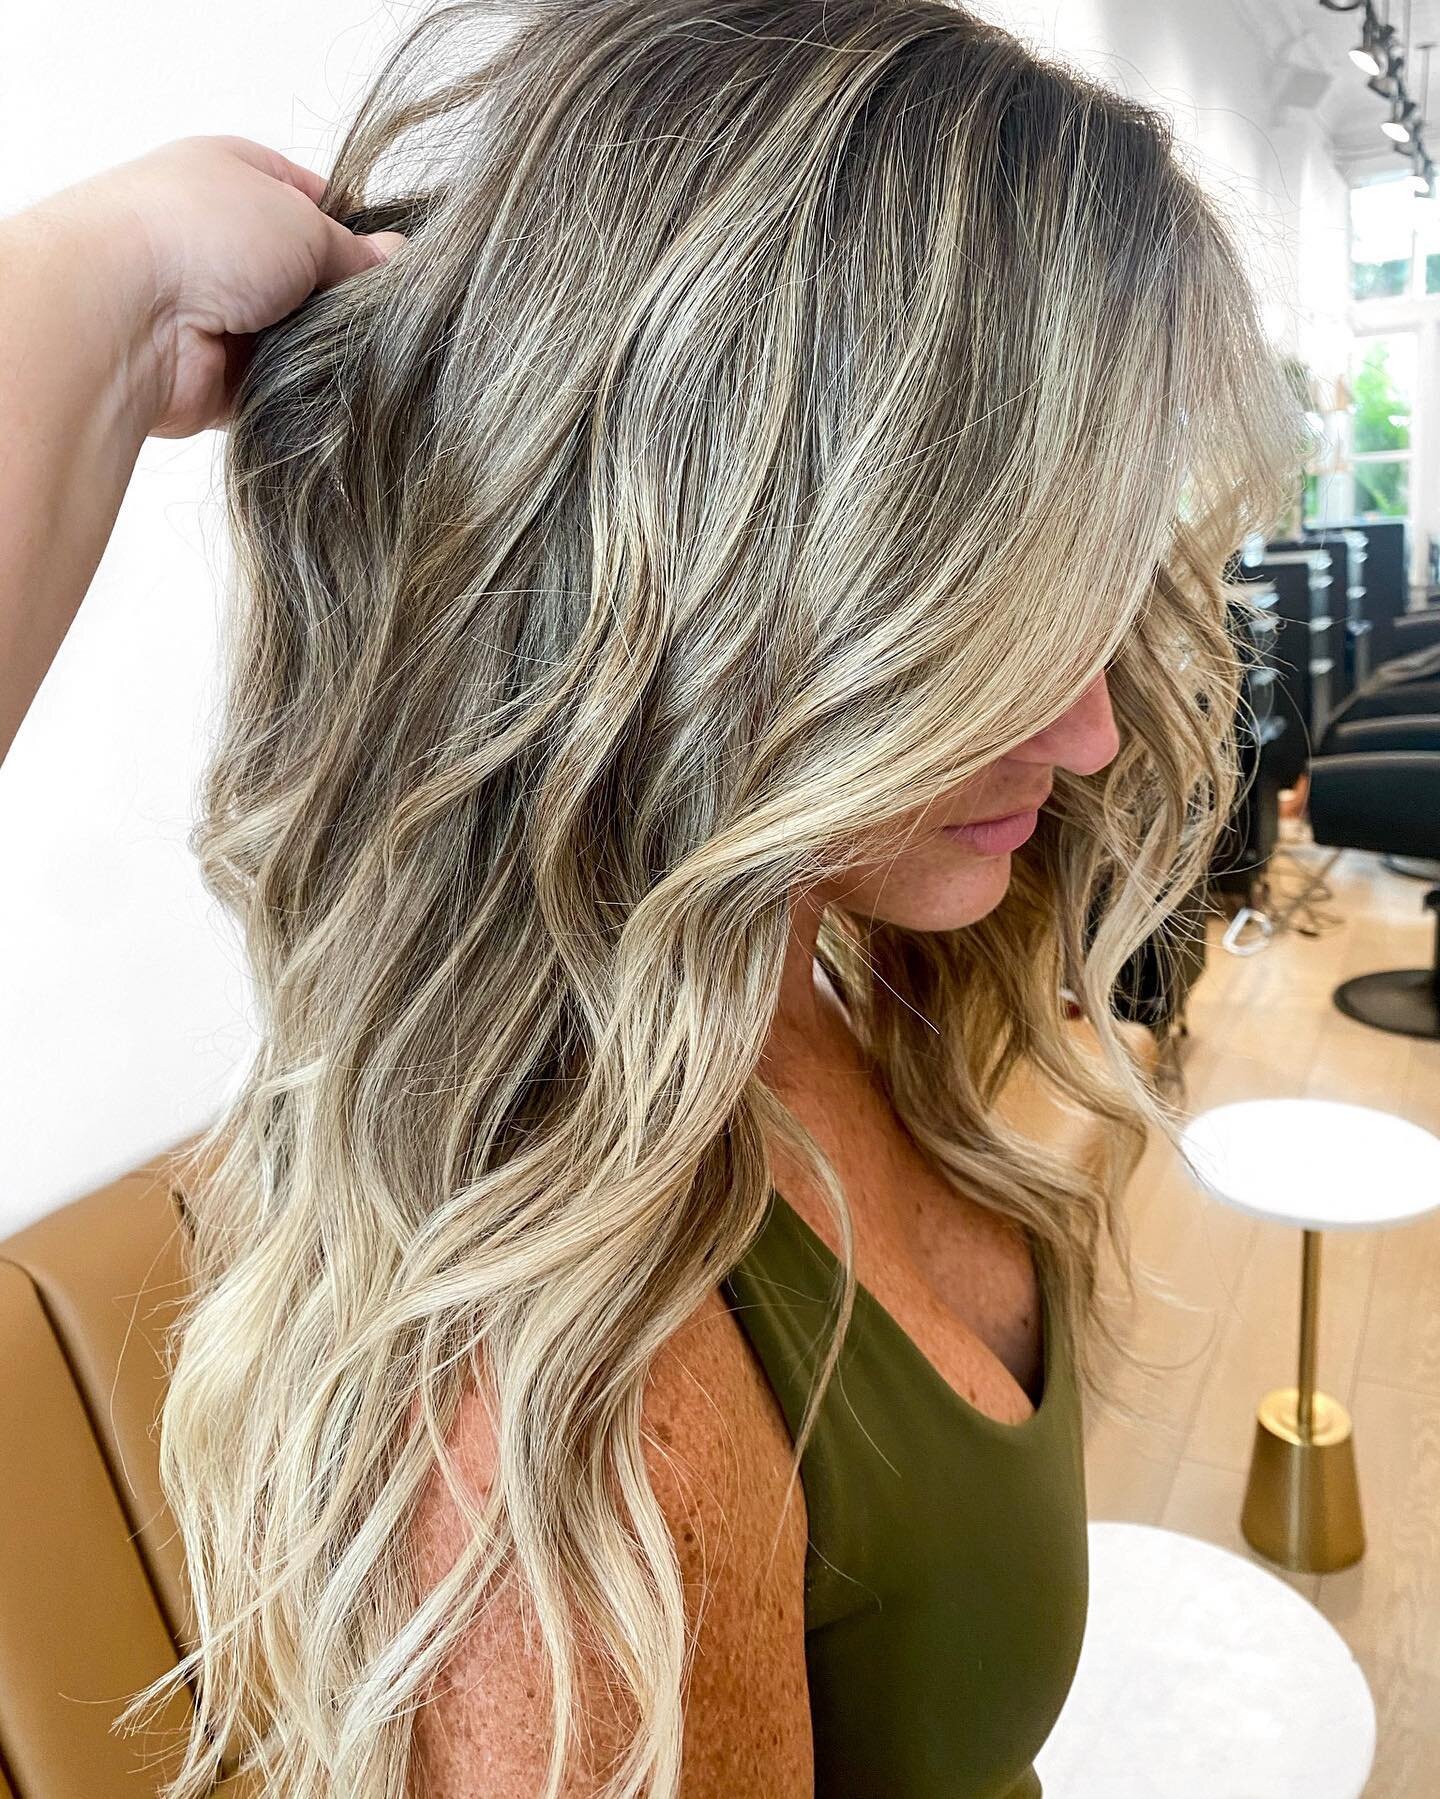 Cool toned blondie coming you way👱🏻&zwj;♀️
⠀⠀⠀⠀⠀⠀⠀⠀⠀
Felicia eva created this look with a few face framing foils, lowlights, and a colormelt for the perfect cool toned blonde 🤍✨
⠀⠀⠀⠀⠀⠀⠀⠀⠀
 #SalonBlondie #SalonBlondieHairLounge #DowntownDeLand #Col